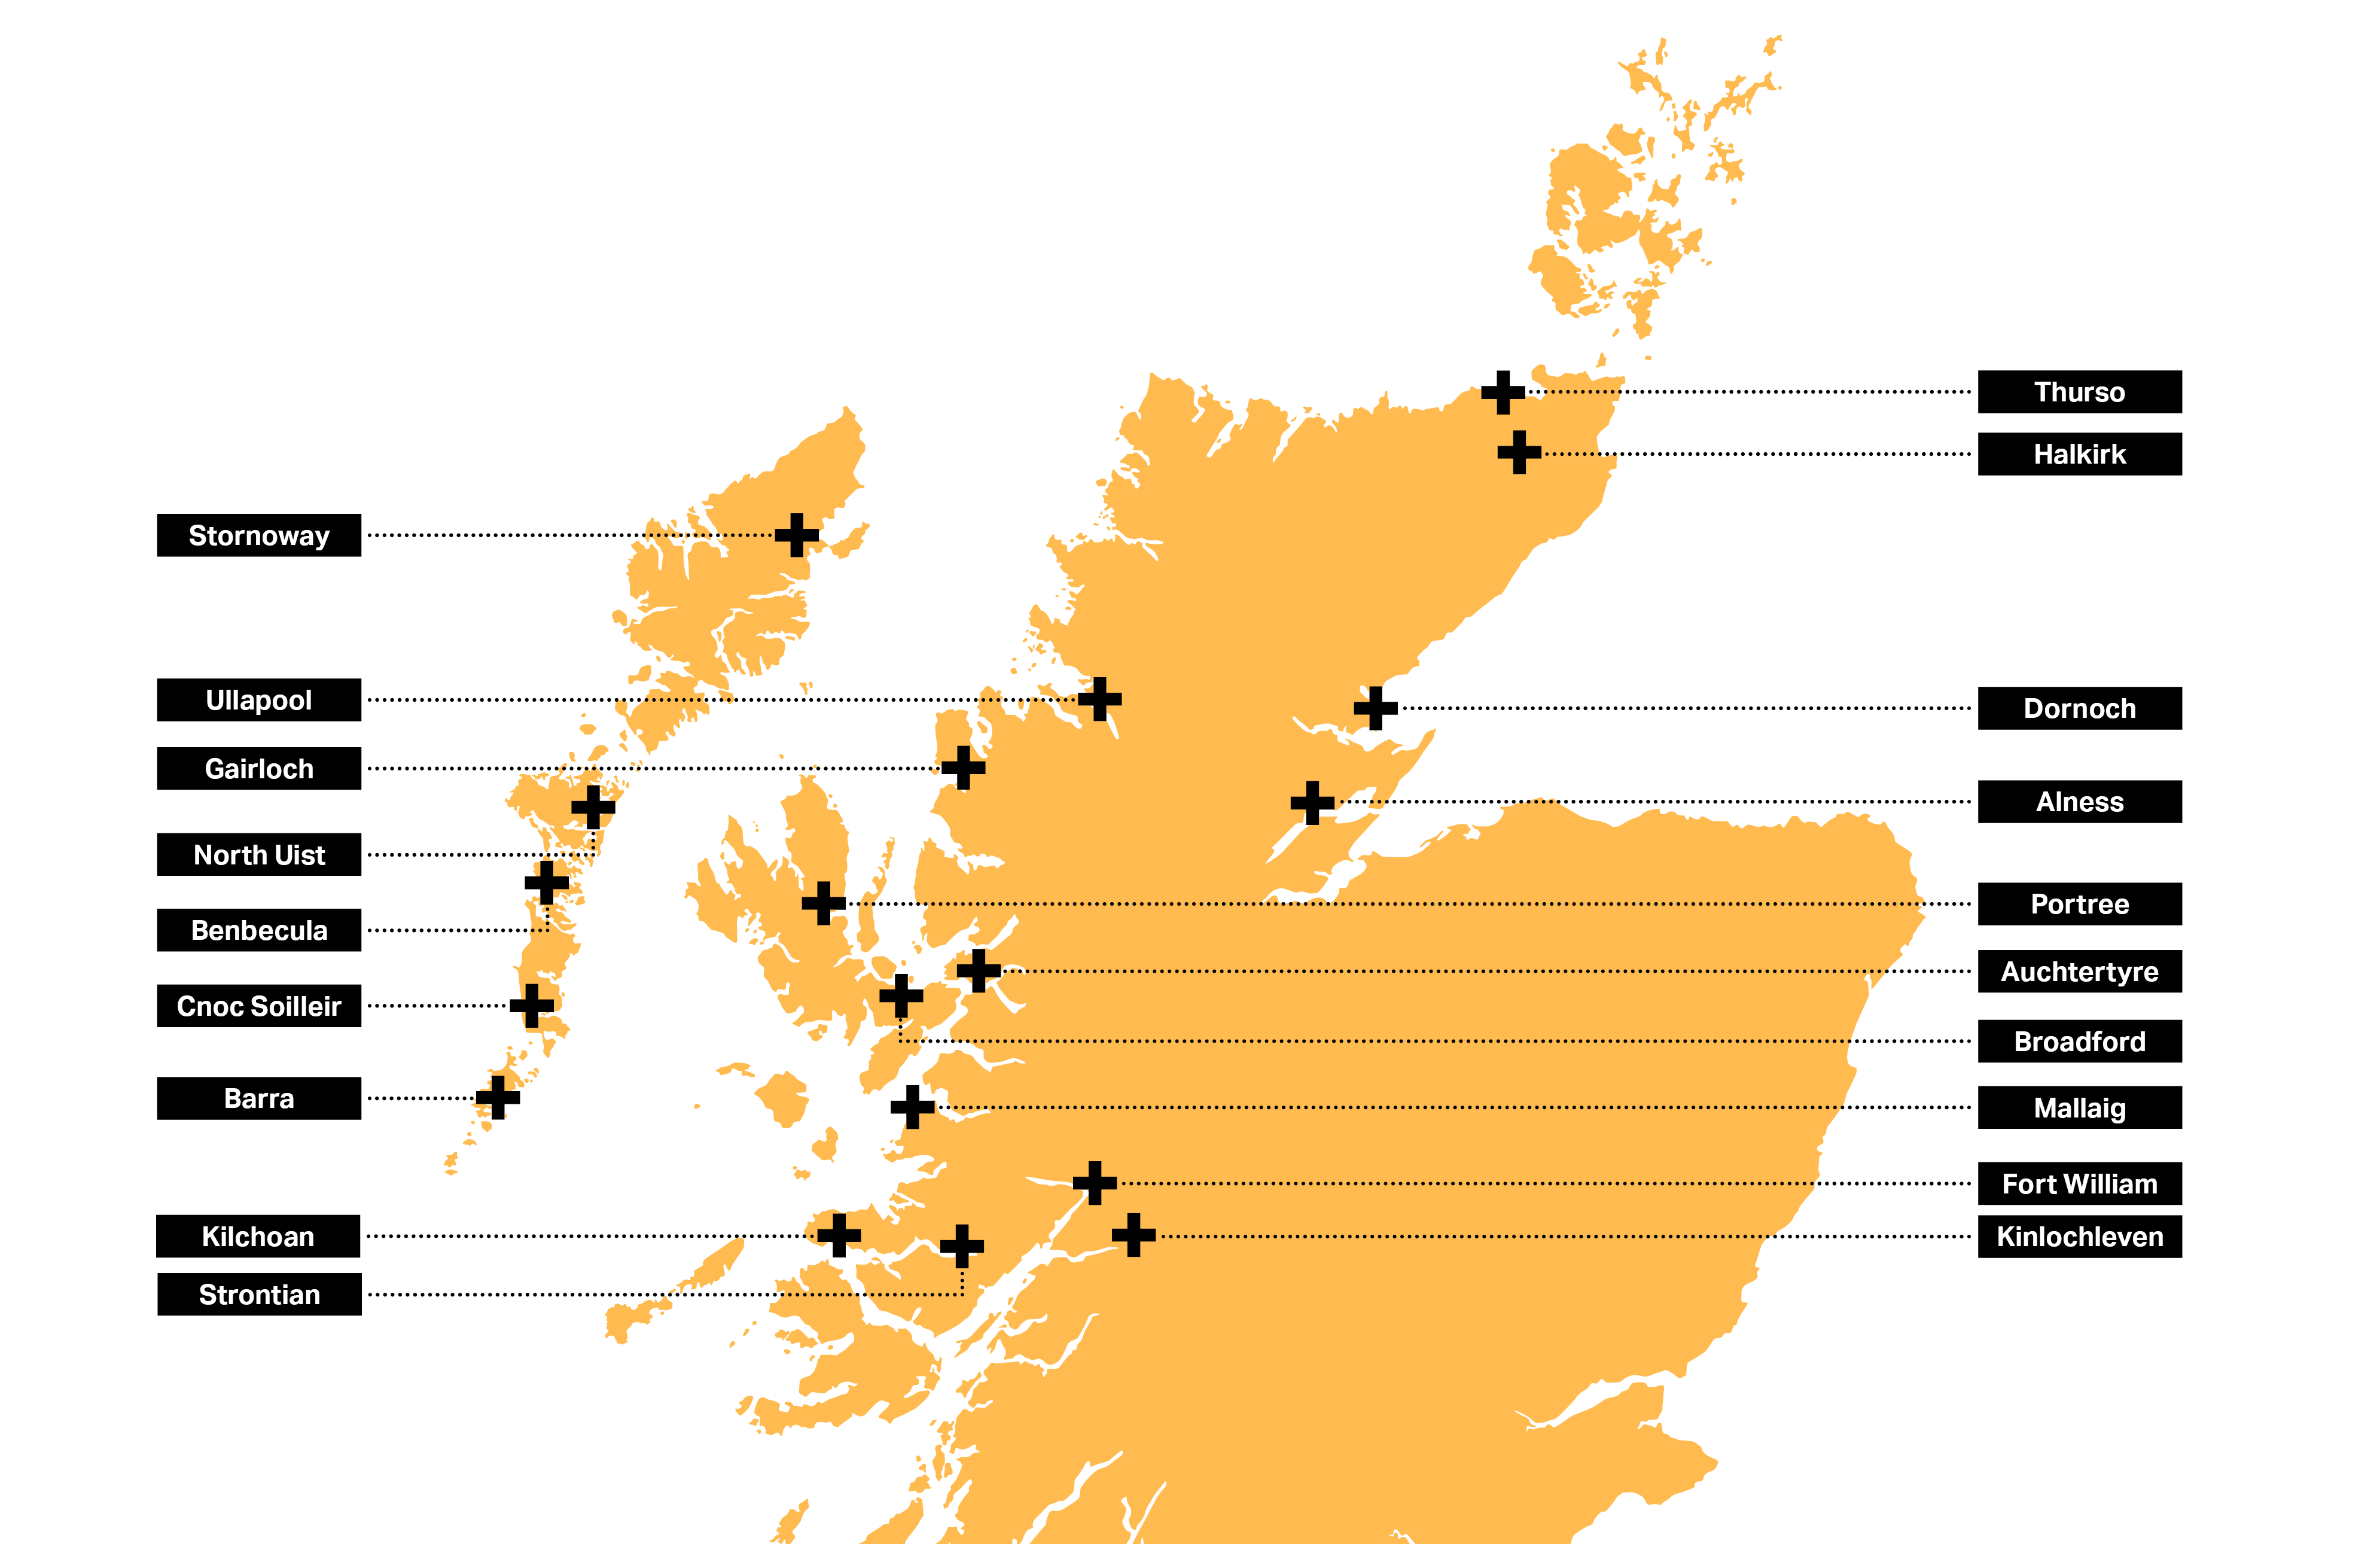 Map showing all UHI North, West and Hebrides campuses including Thurso, Halkirk, Dornoch, Alness, Portree, Auchtertyre, Broadford, Mallaig, Fort Willia, Kinlochleven, Strontian, Kilchoan, Barra, Cnoc Soillier, Benbecula, North Uist, Gariloch, Ullapool and Stornoway.